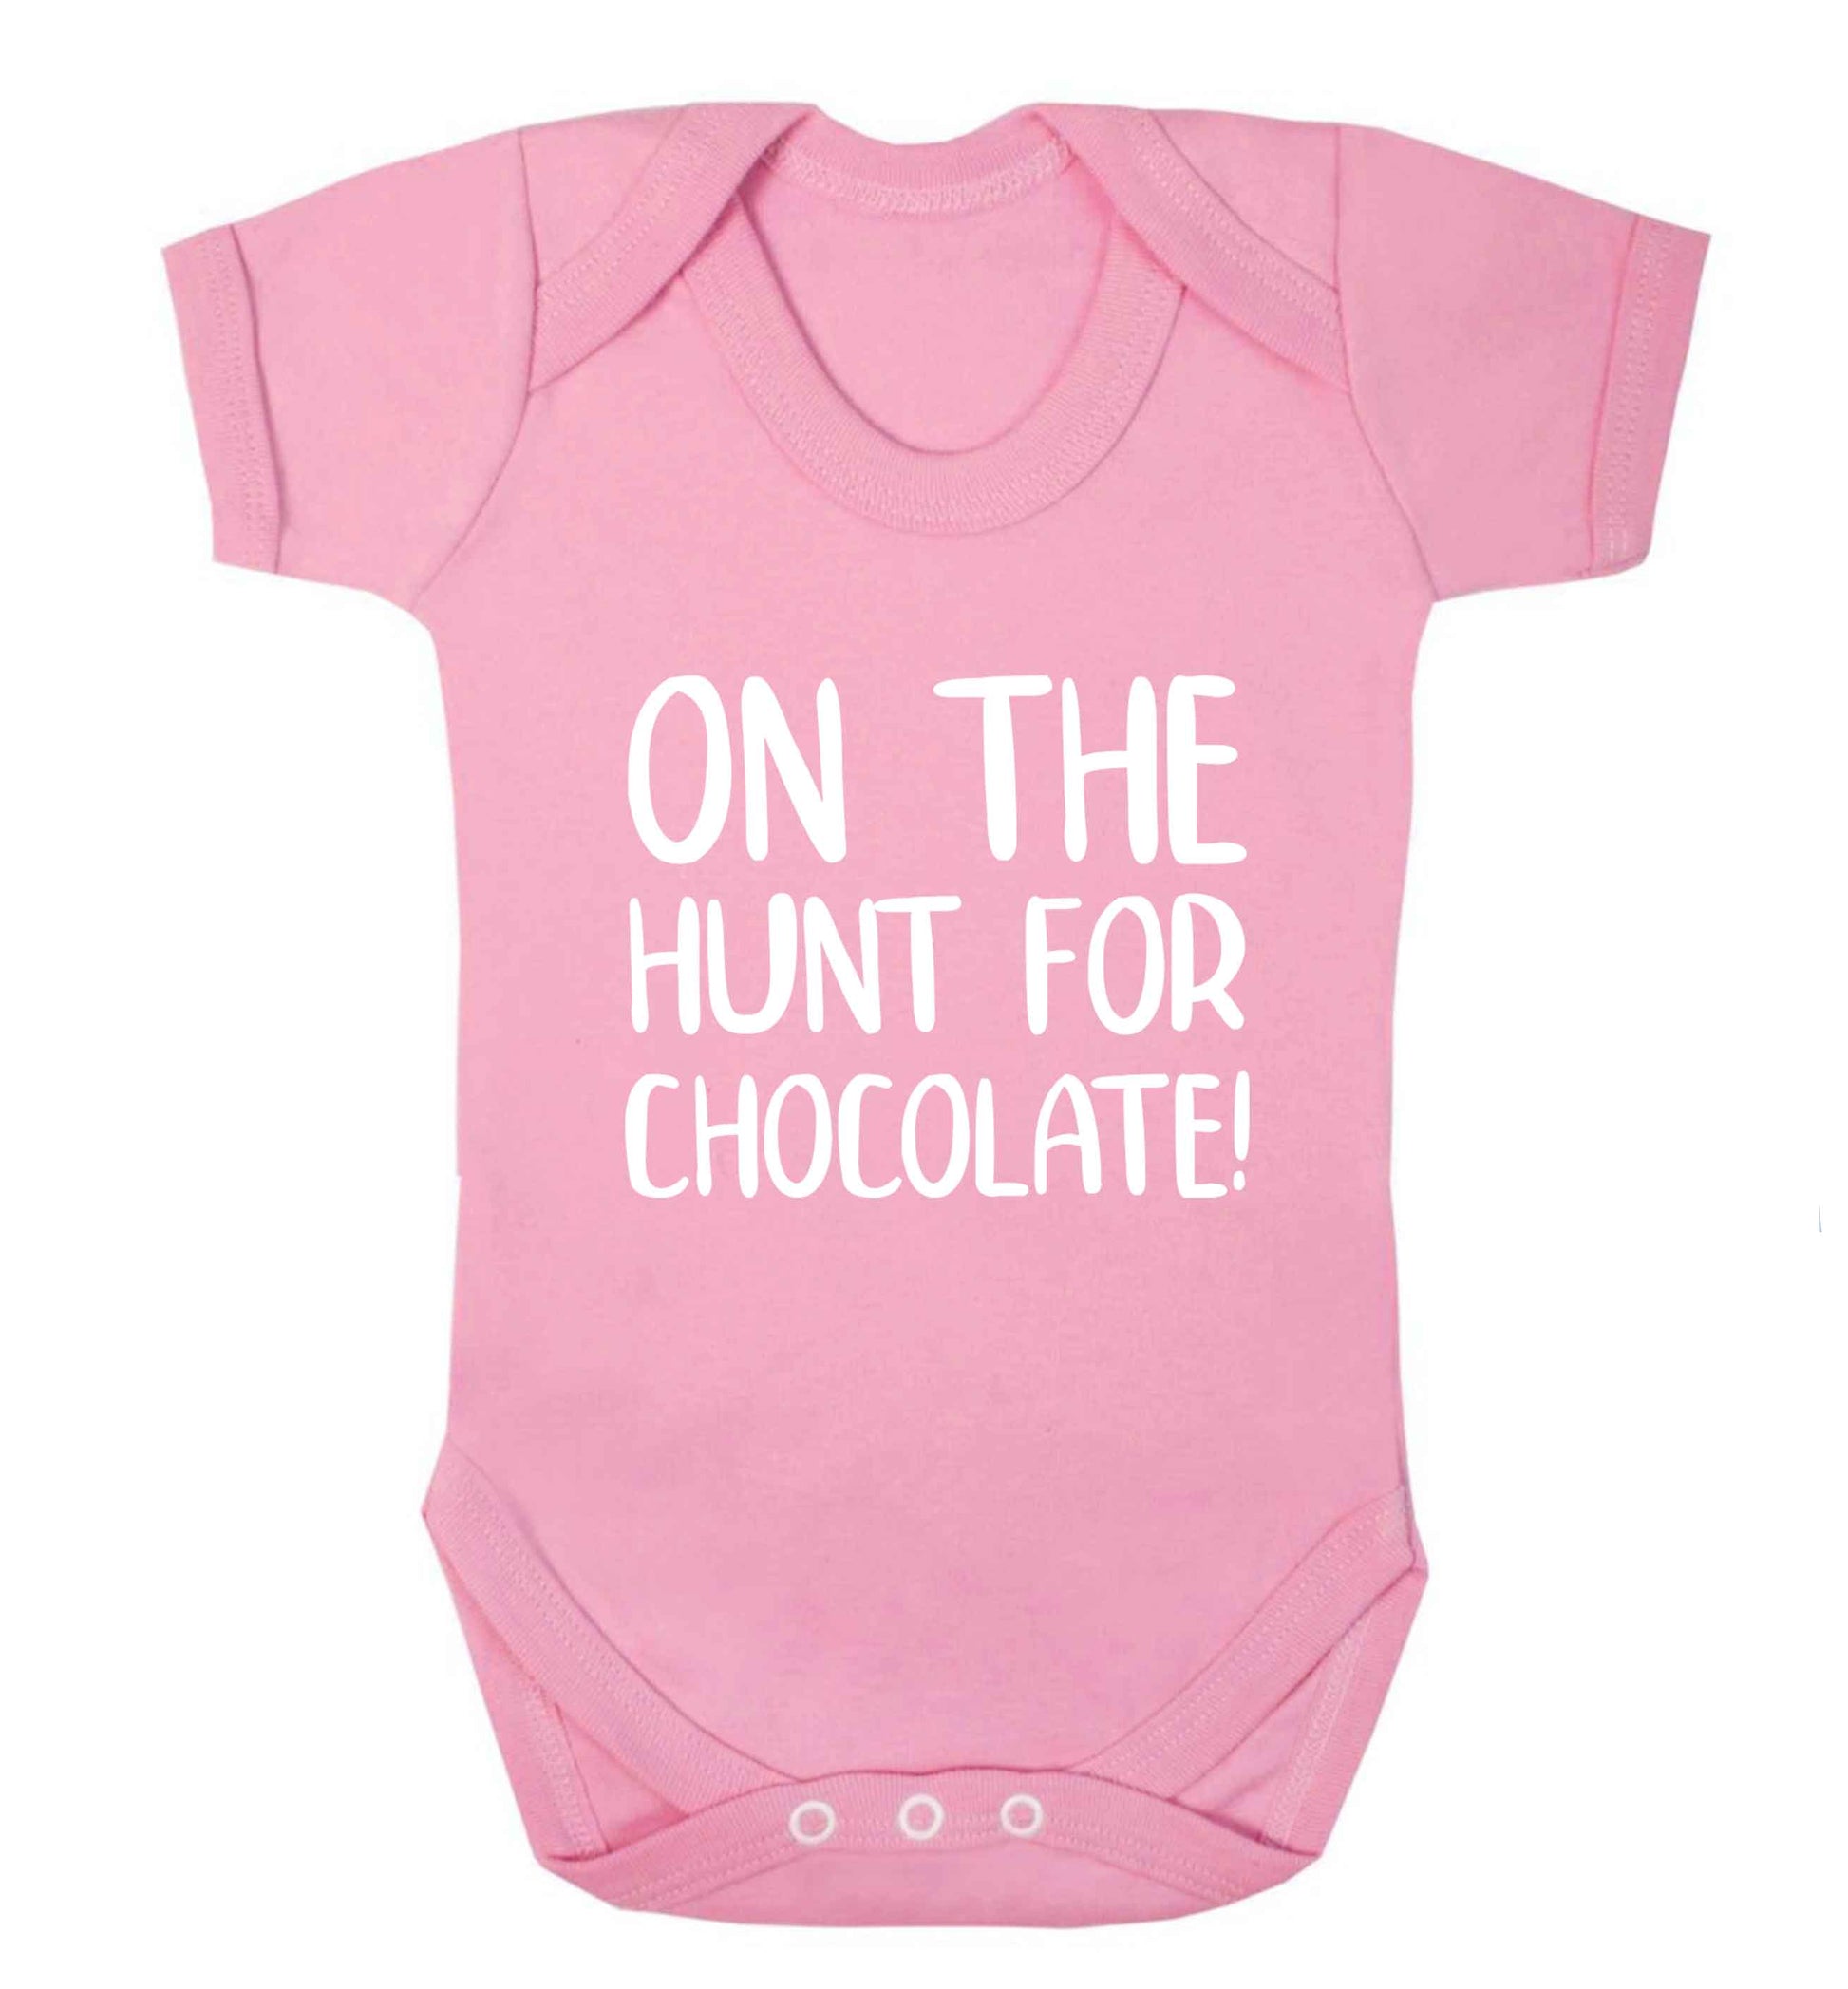 On the hunt for chocolate! baby vest pale pink 18-24 months